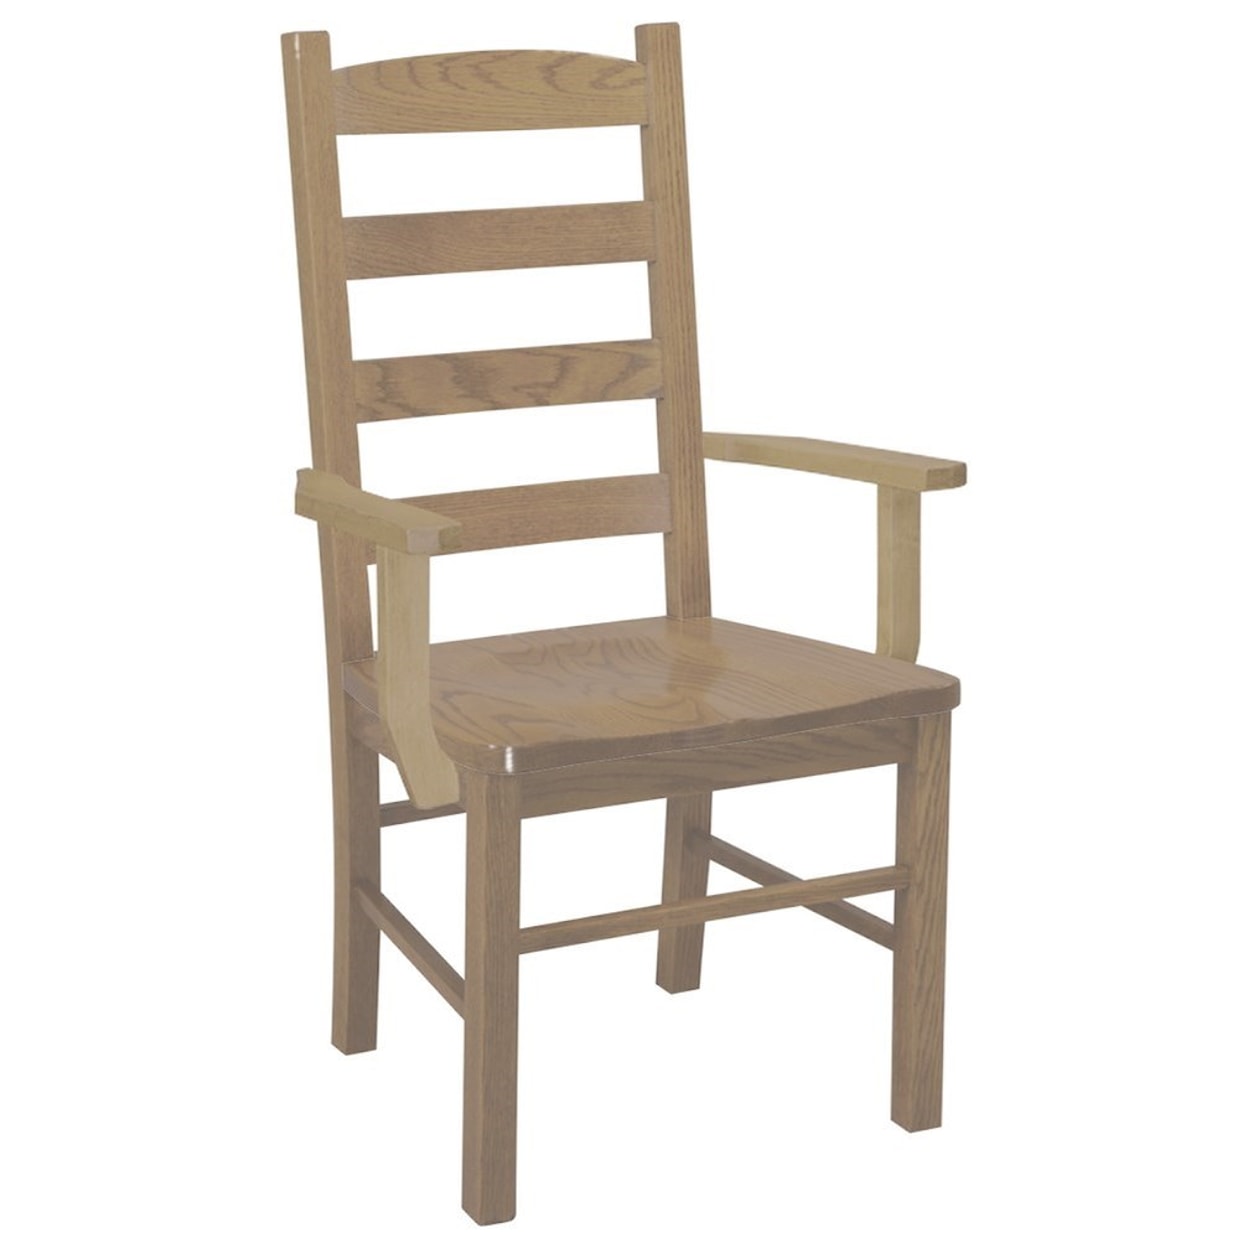 Daniel's Amish Chairs and Barstools Ladder Back Arm Chair